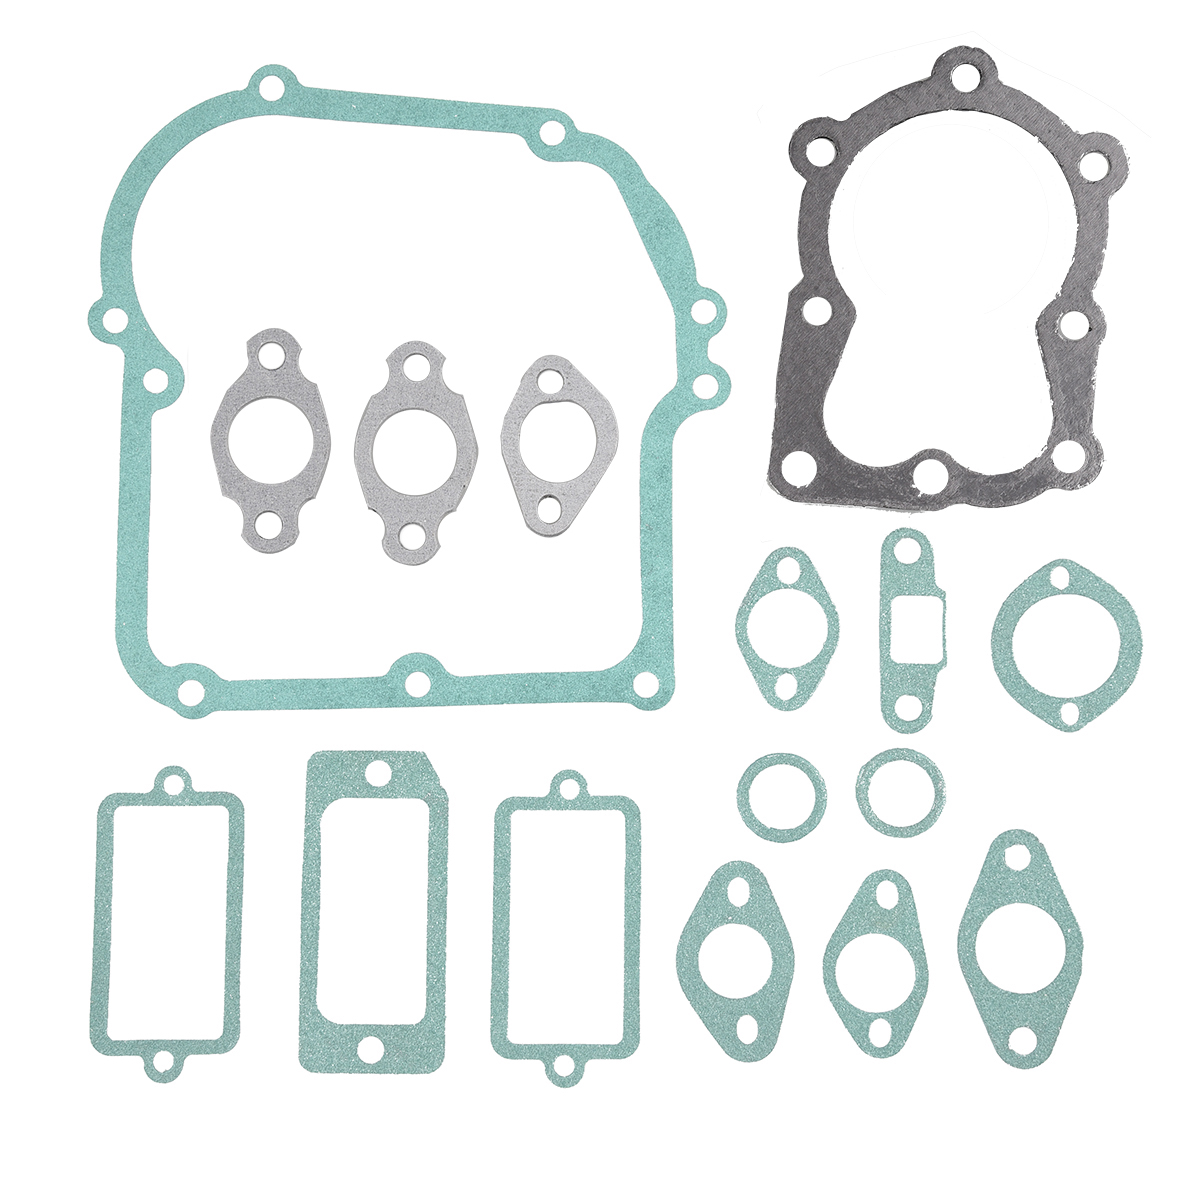 Replacement Gasket Set #33233 33233A for Tecumseh Engine H25 H30 H35 HSK HXl35